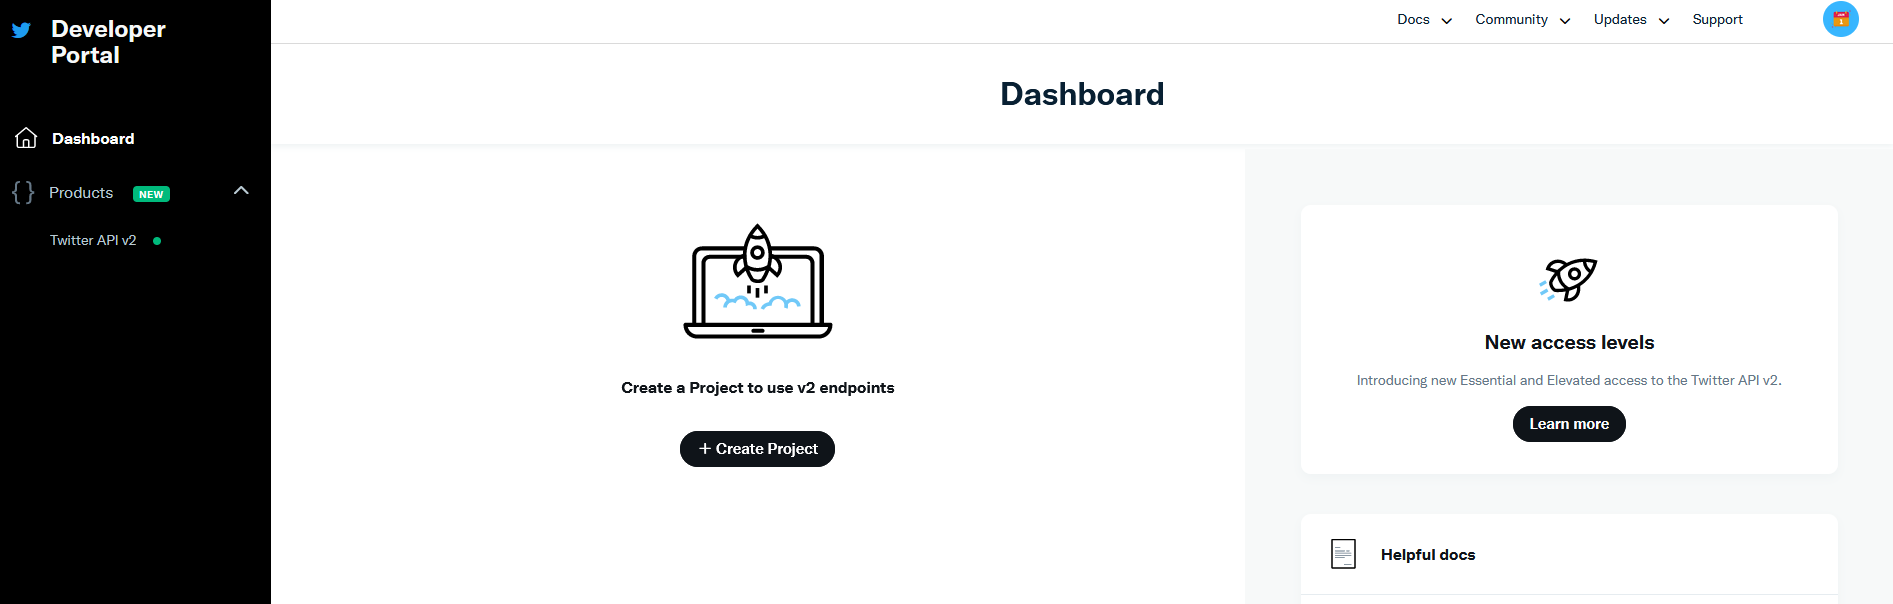 Twitter developer portal with no projects listed. A Create Project button is in the middle.